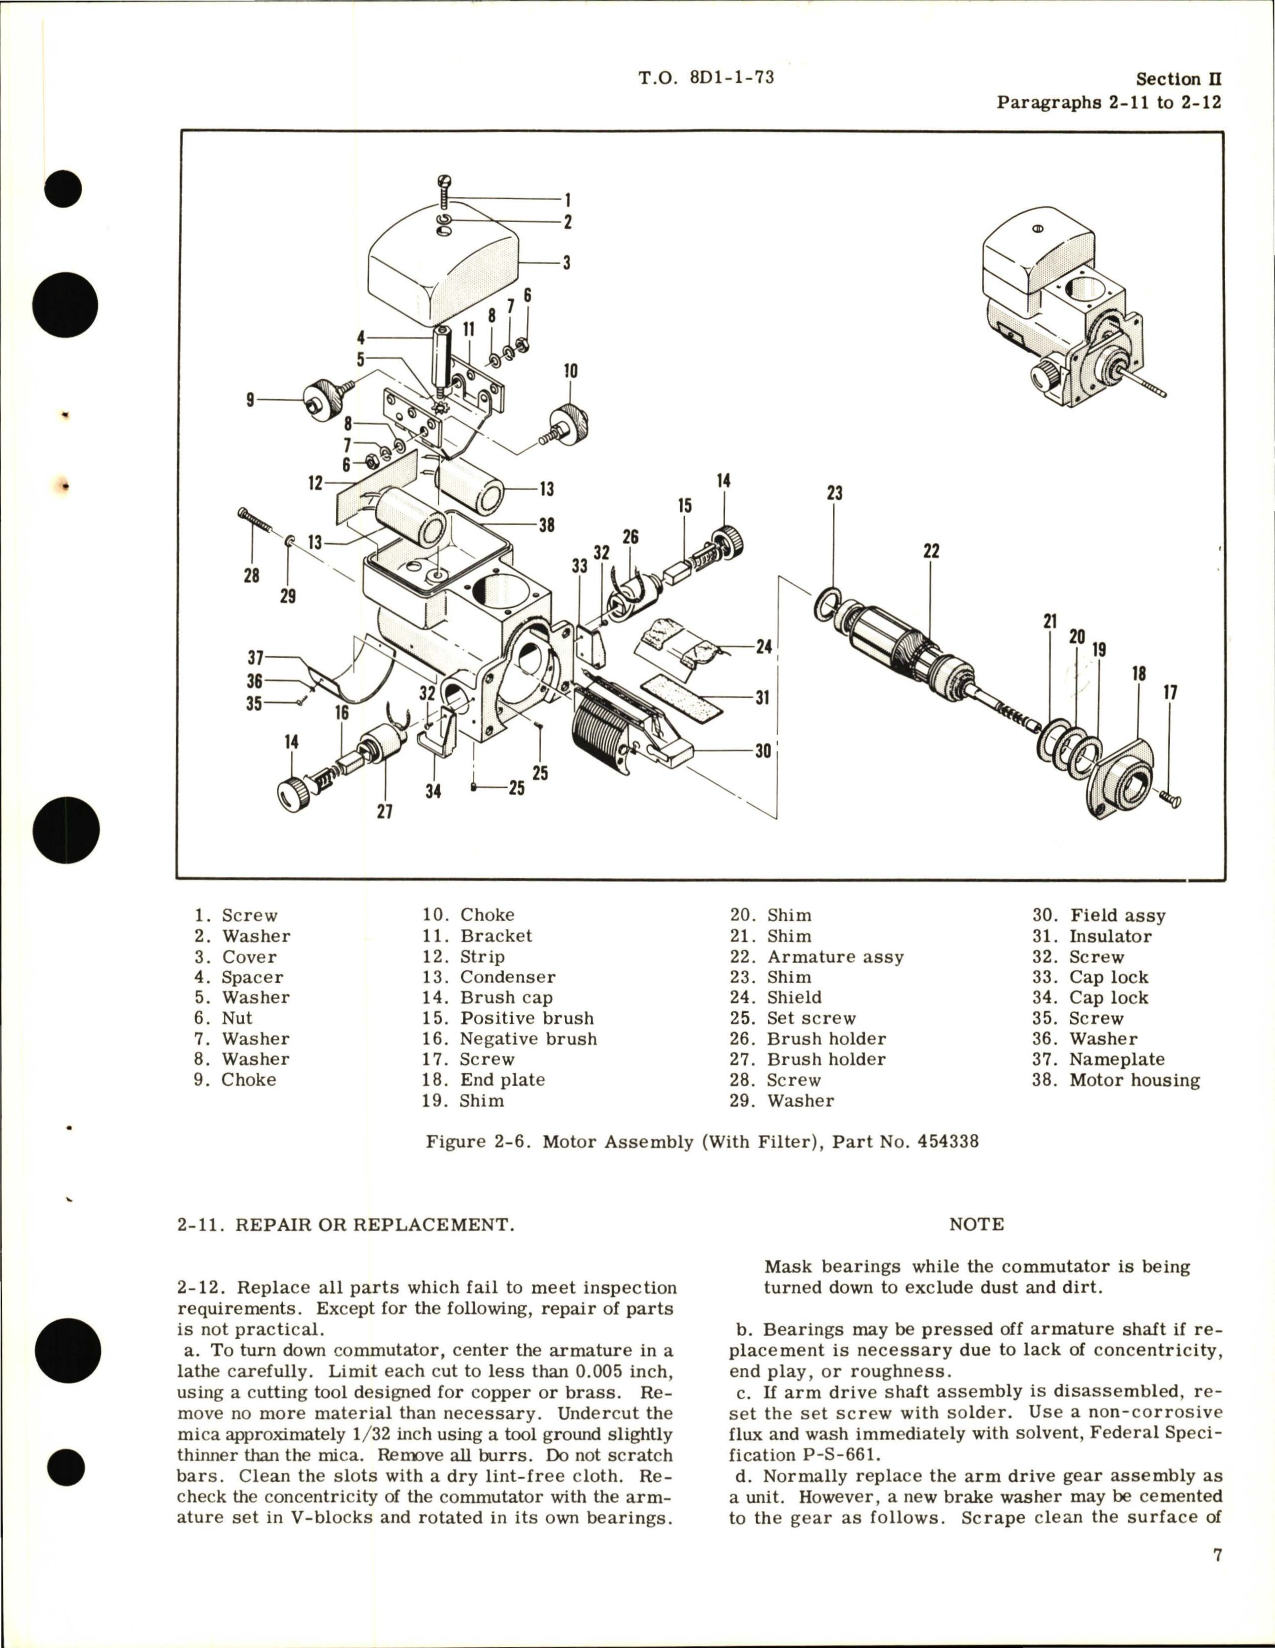 Sample page 9 from AirCorps Library document: Overhaul Instructions for Geneva-Loc Actuators - Series 108 